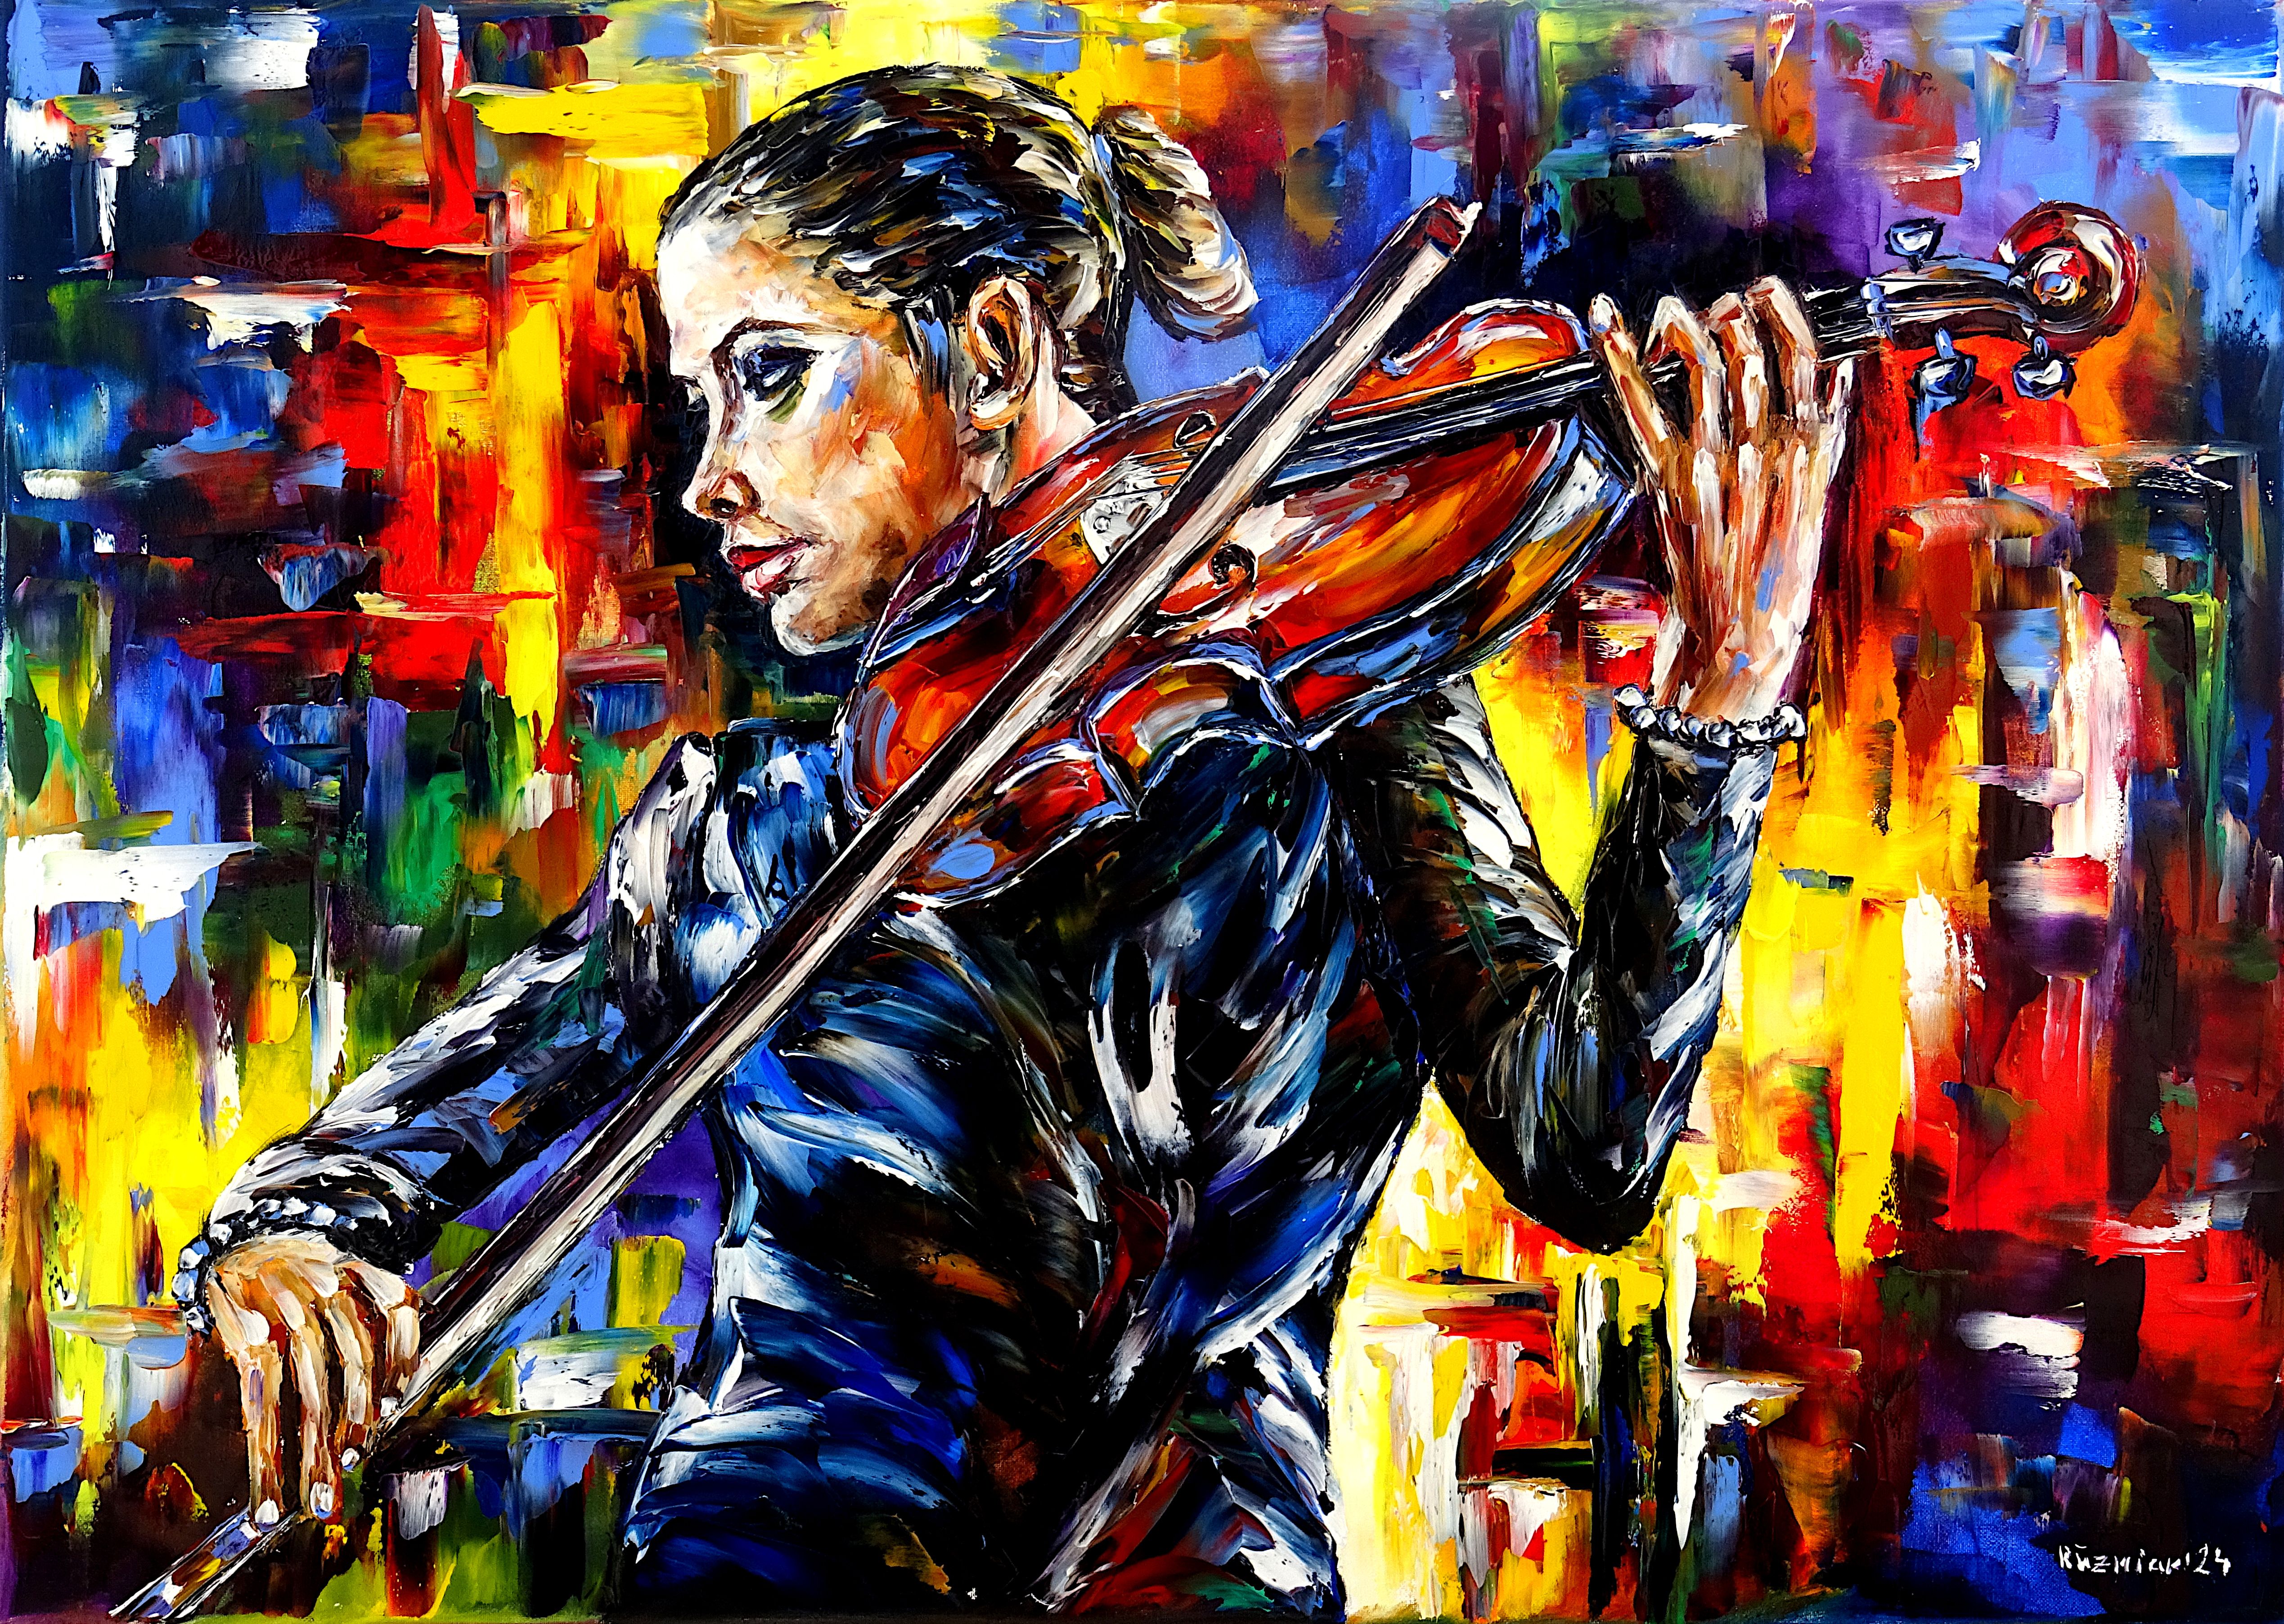 beautiful violinist,pretty violinist,violin,violin player,playing violin,female violinist,she plays violin,girl with violin,girl plays violin,woman with violin,woman plays violin,music,female musician,female violinist painting,violin love,violin lover,classical music,classical,making music,playing music,immersed in music,feeling music,closed eyes,musical instrument,I love violin,palette knife oil painting,expressive art,expressive painting,expressionism,lively colors,colorful painting,impasto painting,figurative